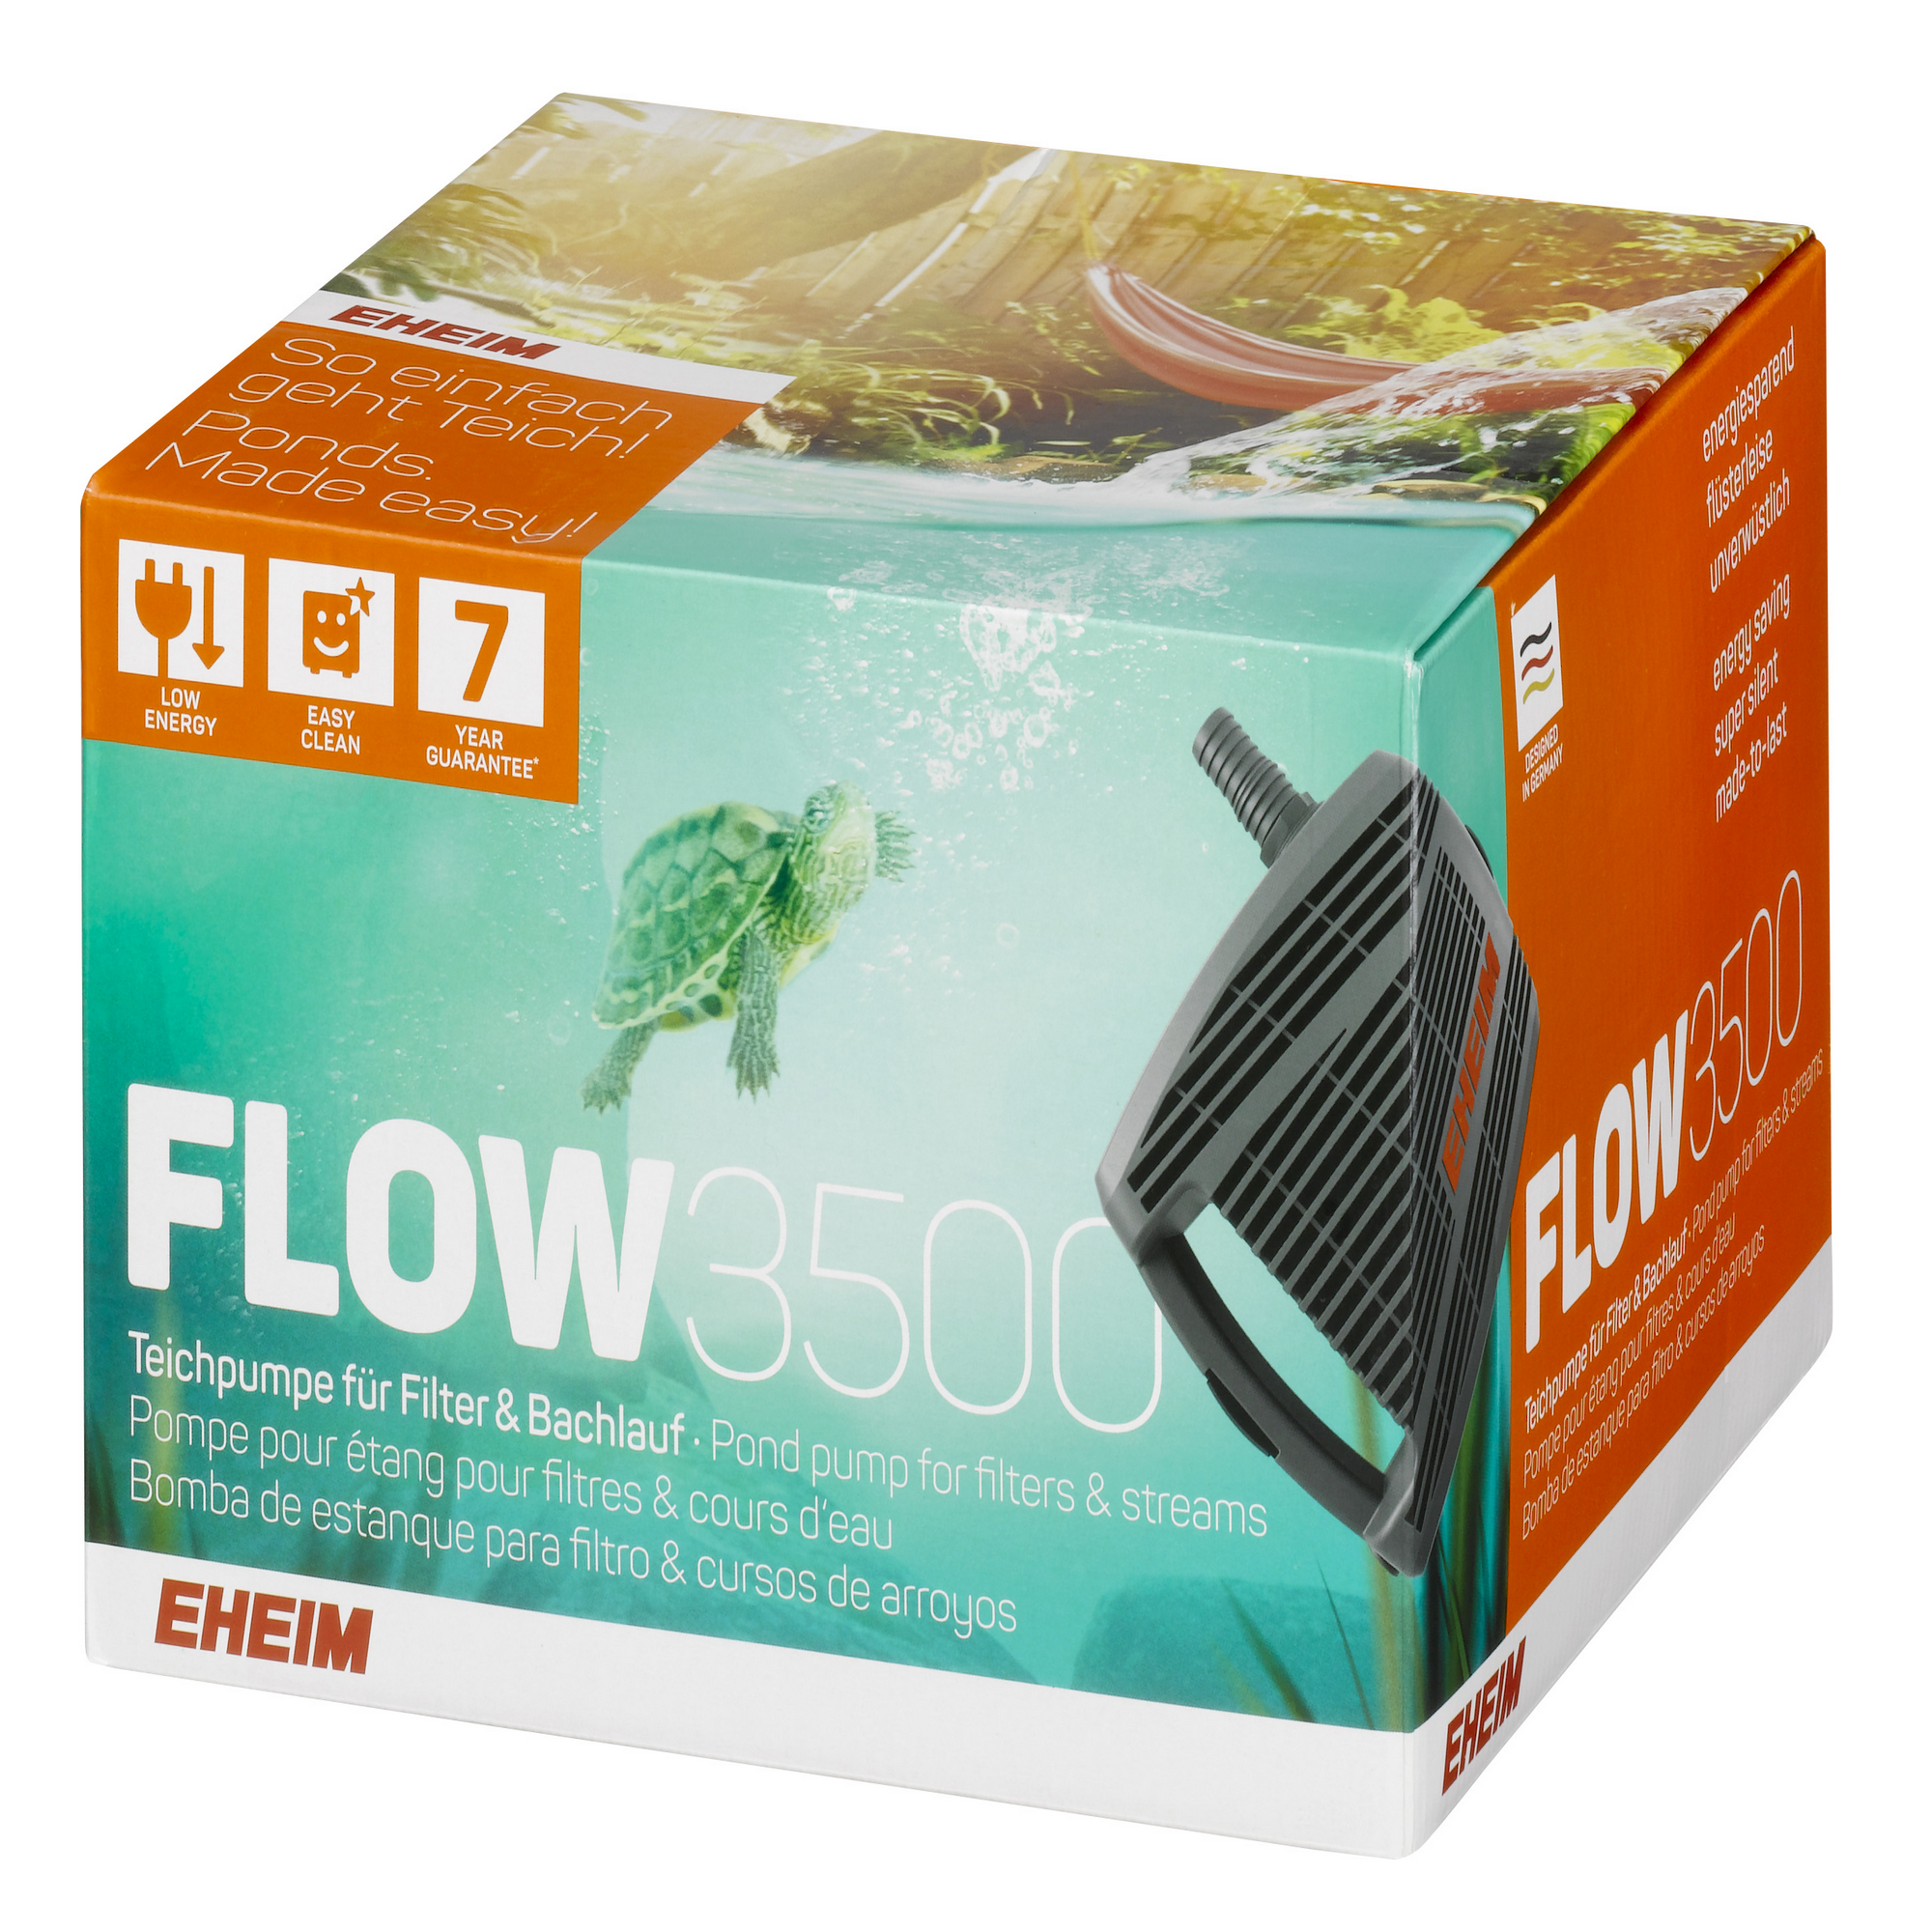 Eheim FLOW 3500 Teichpumpe + product picture